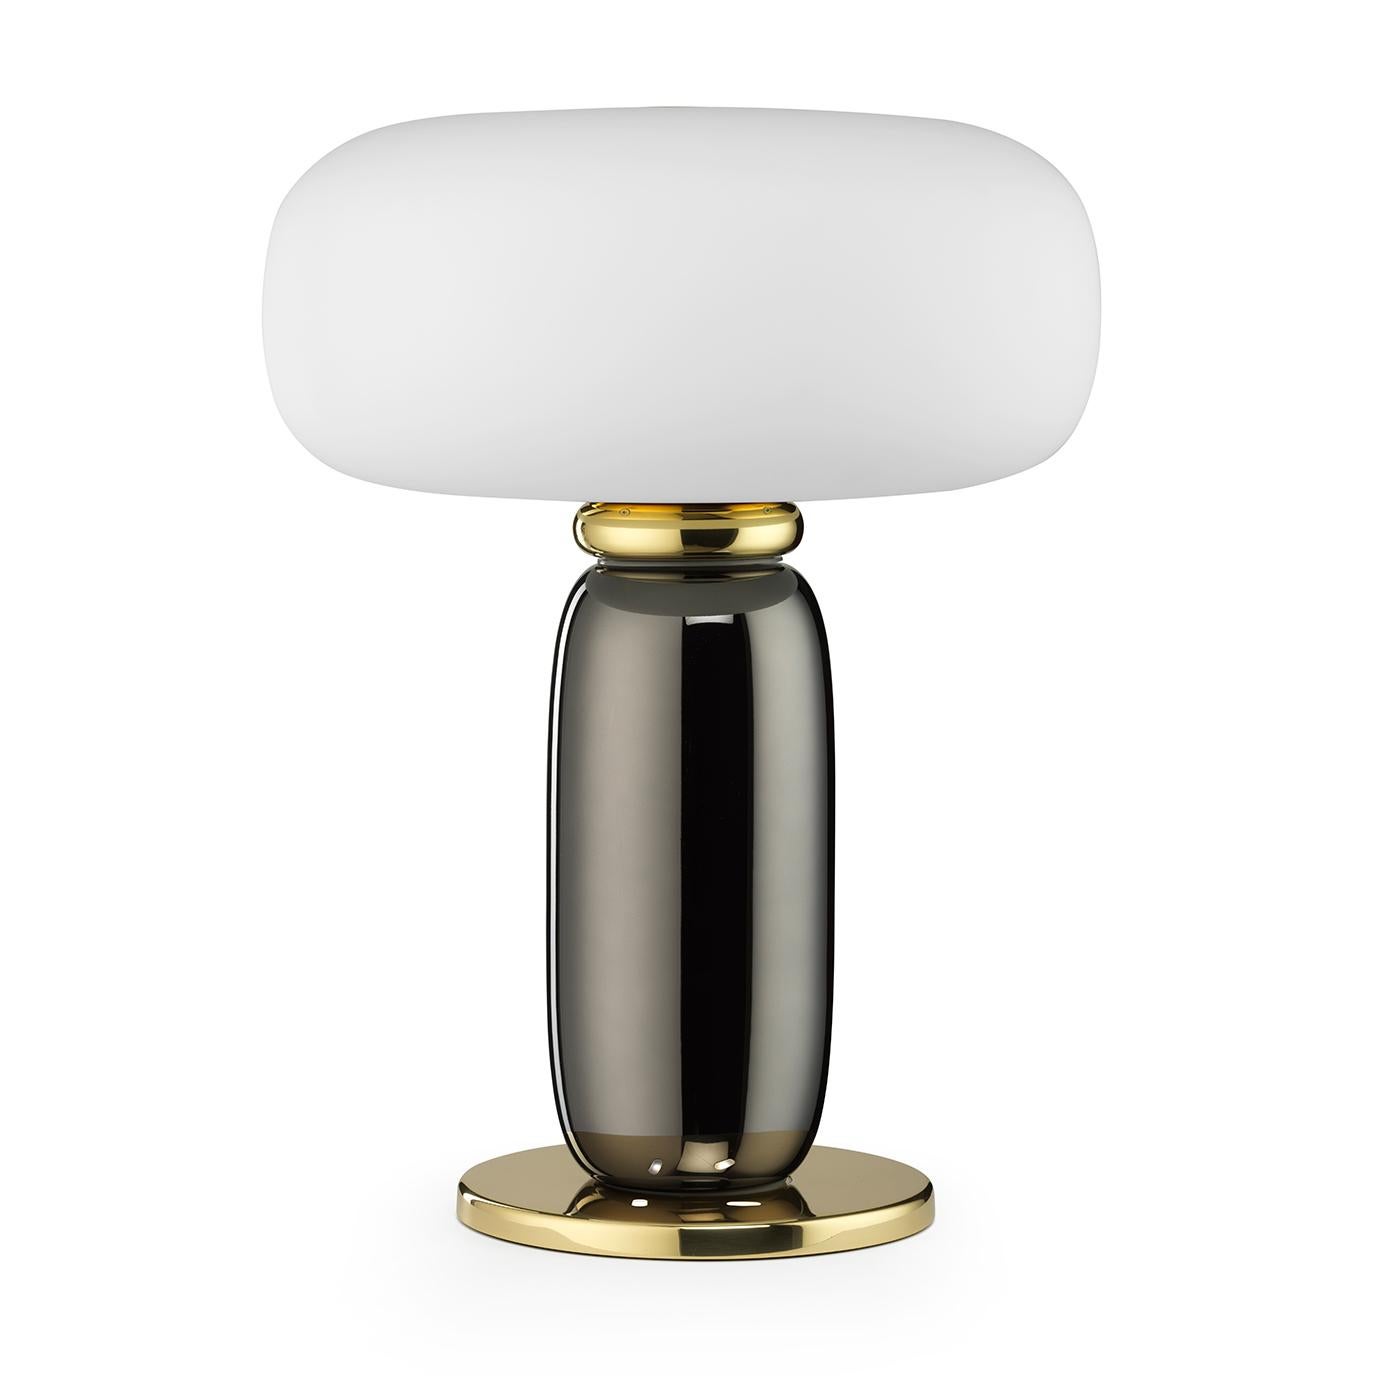 A fascinating combination of hues and materials, this table lamp will make an elegant addition to a console or writing desk in both a modern or traditional home. Delivering a strong, powerful presence, it is fashioned of polished gold-finished brass